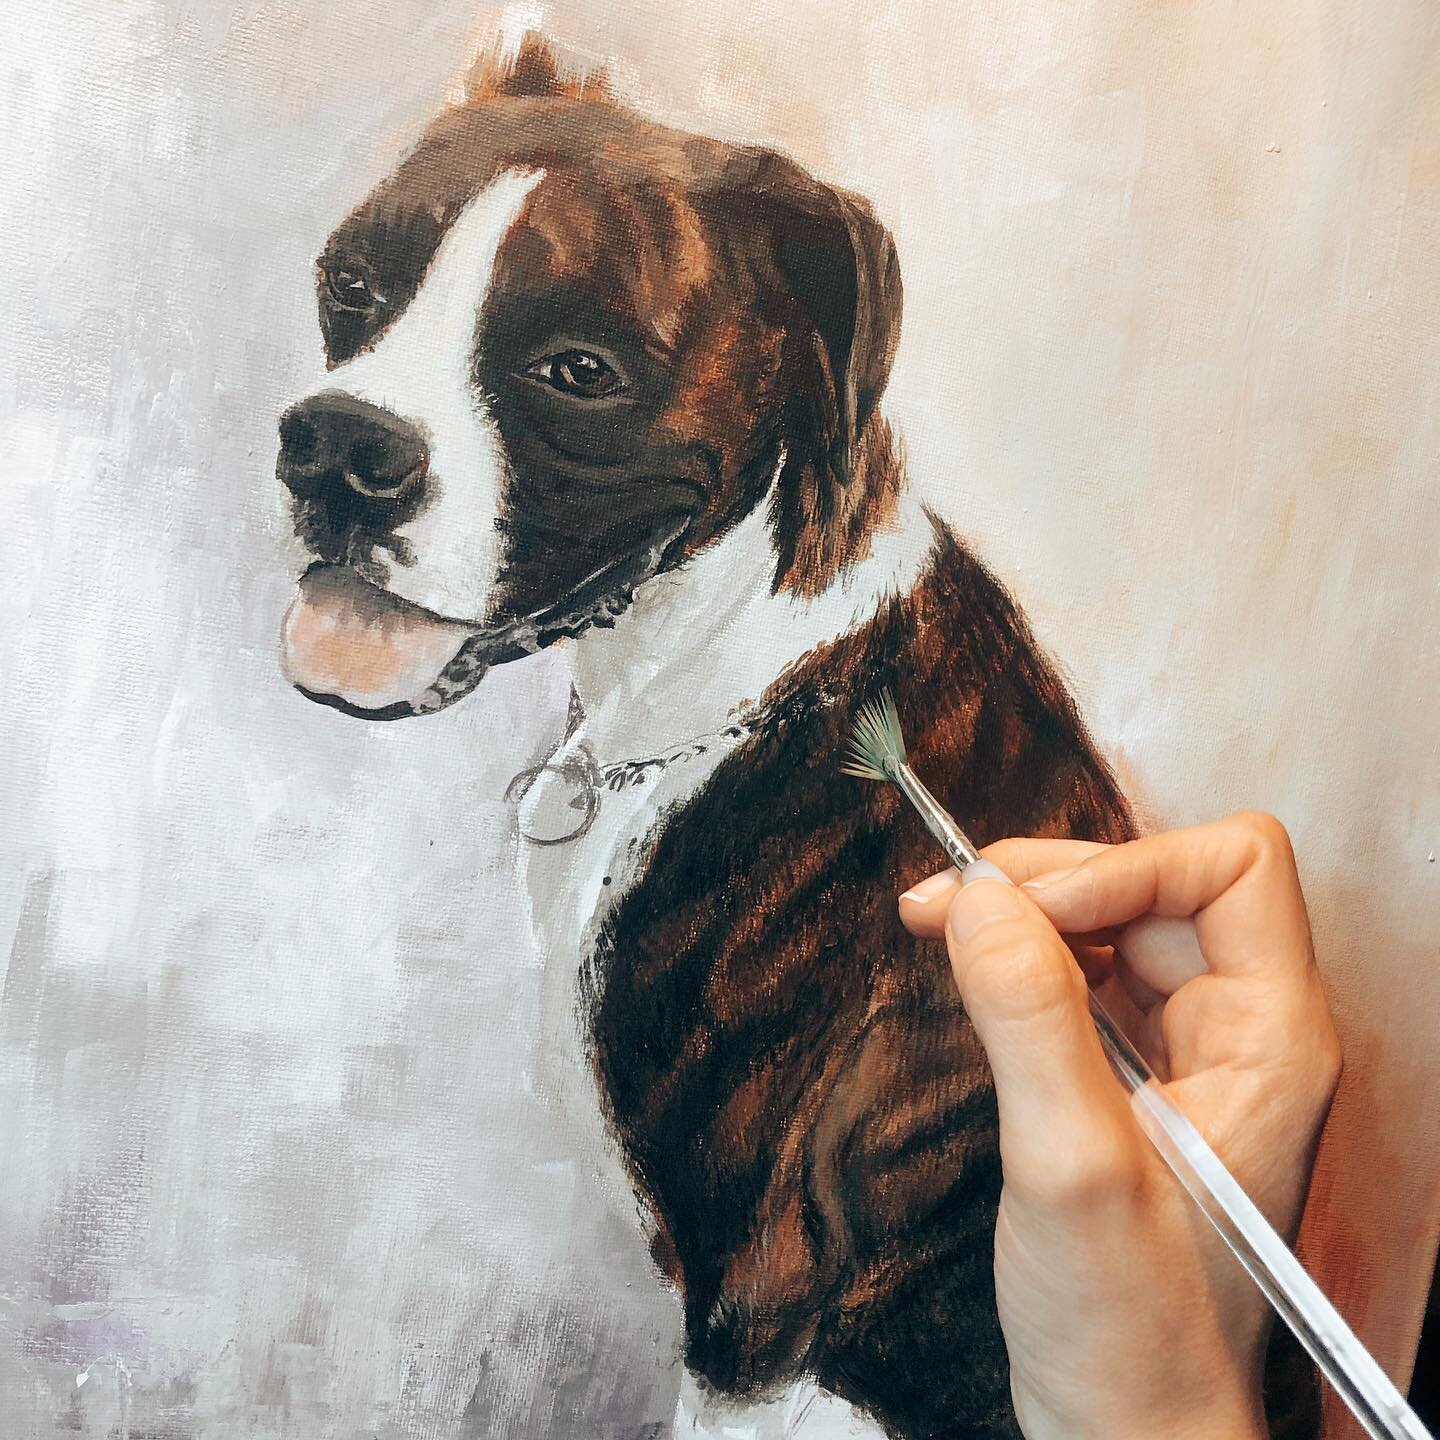 This is &ldquo;Addy&rdquo; in progress.. 
Did you know ?..
Studies have shown that even small interactions with dogs cause the human brain to produce oxytocin, a hormone often referred to as the &ldquo;cuddle chemical.&rdquo; Oxytocin increases feeli